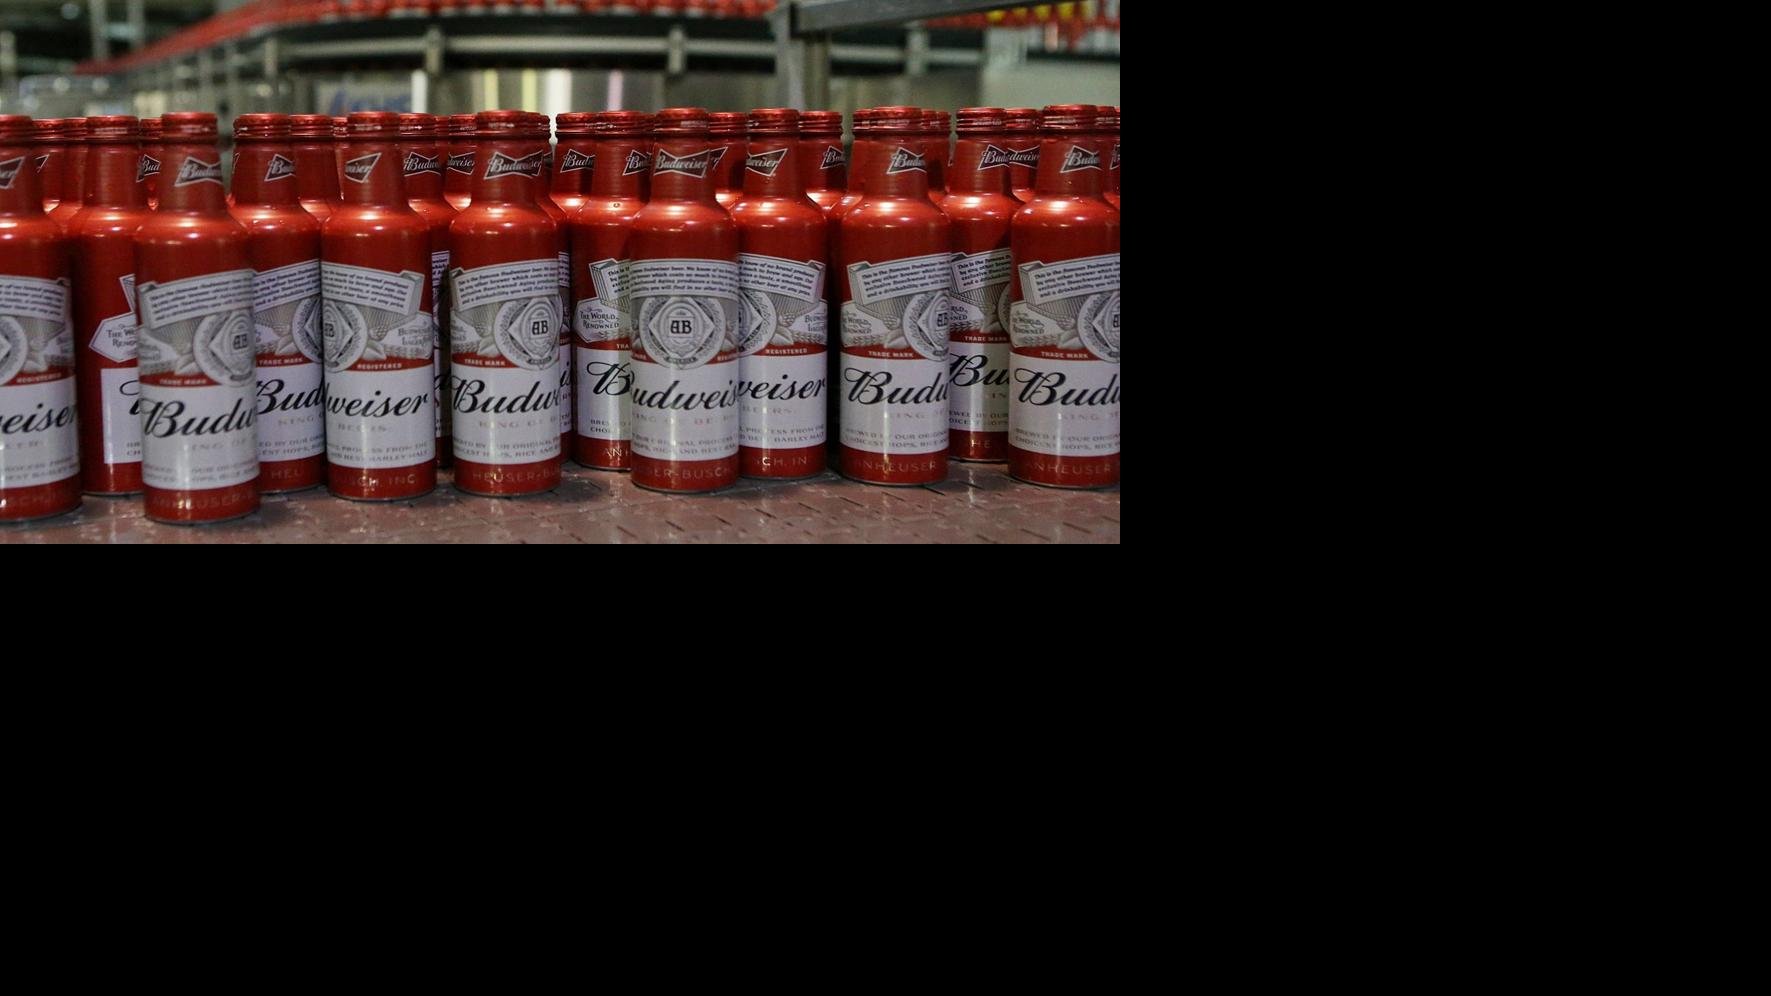 Bud Light, Budweiser market share losses continue in U.S. Local